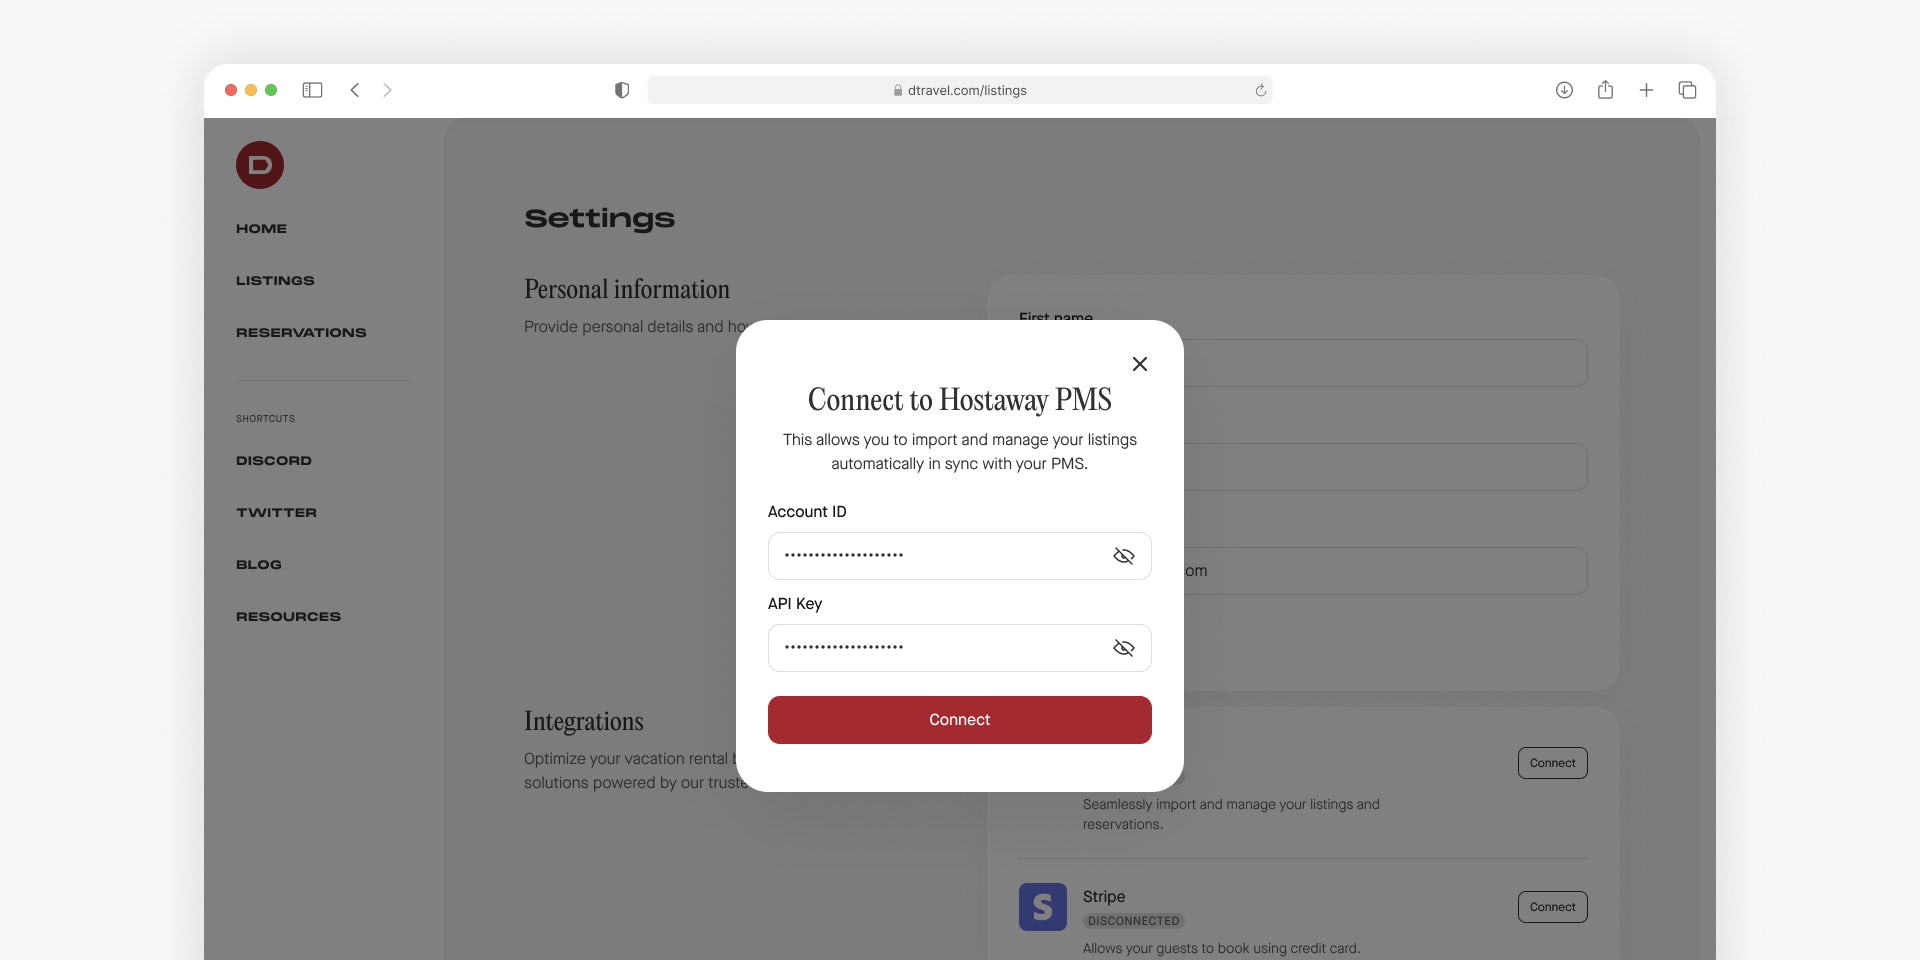 Connect to Hostaway PMS